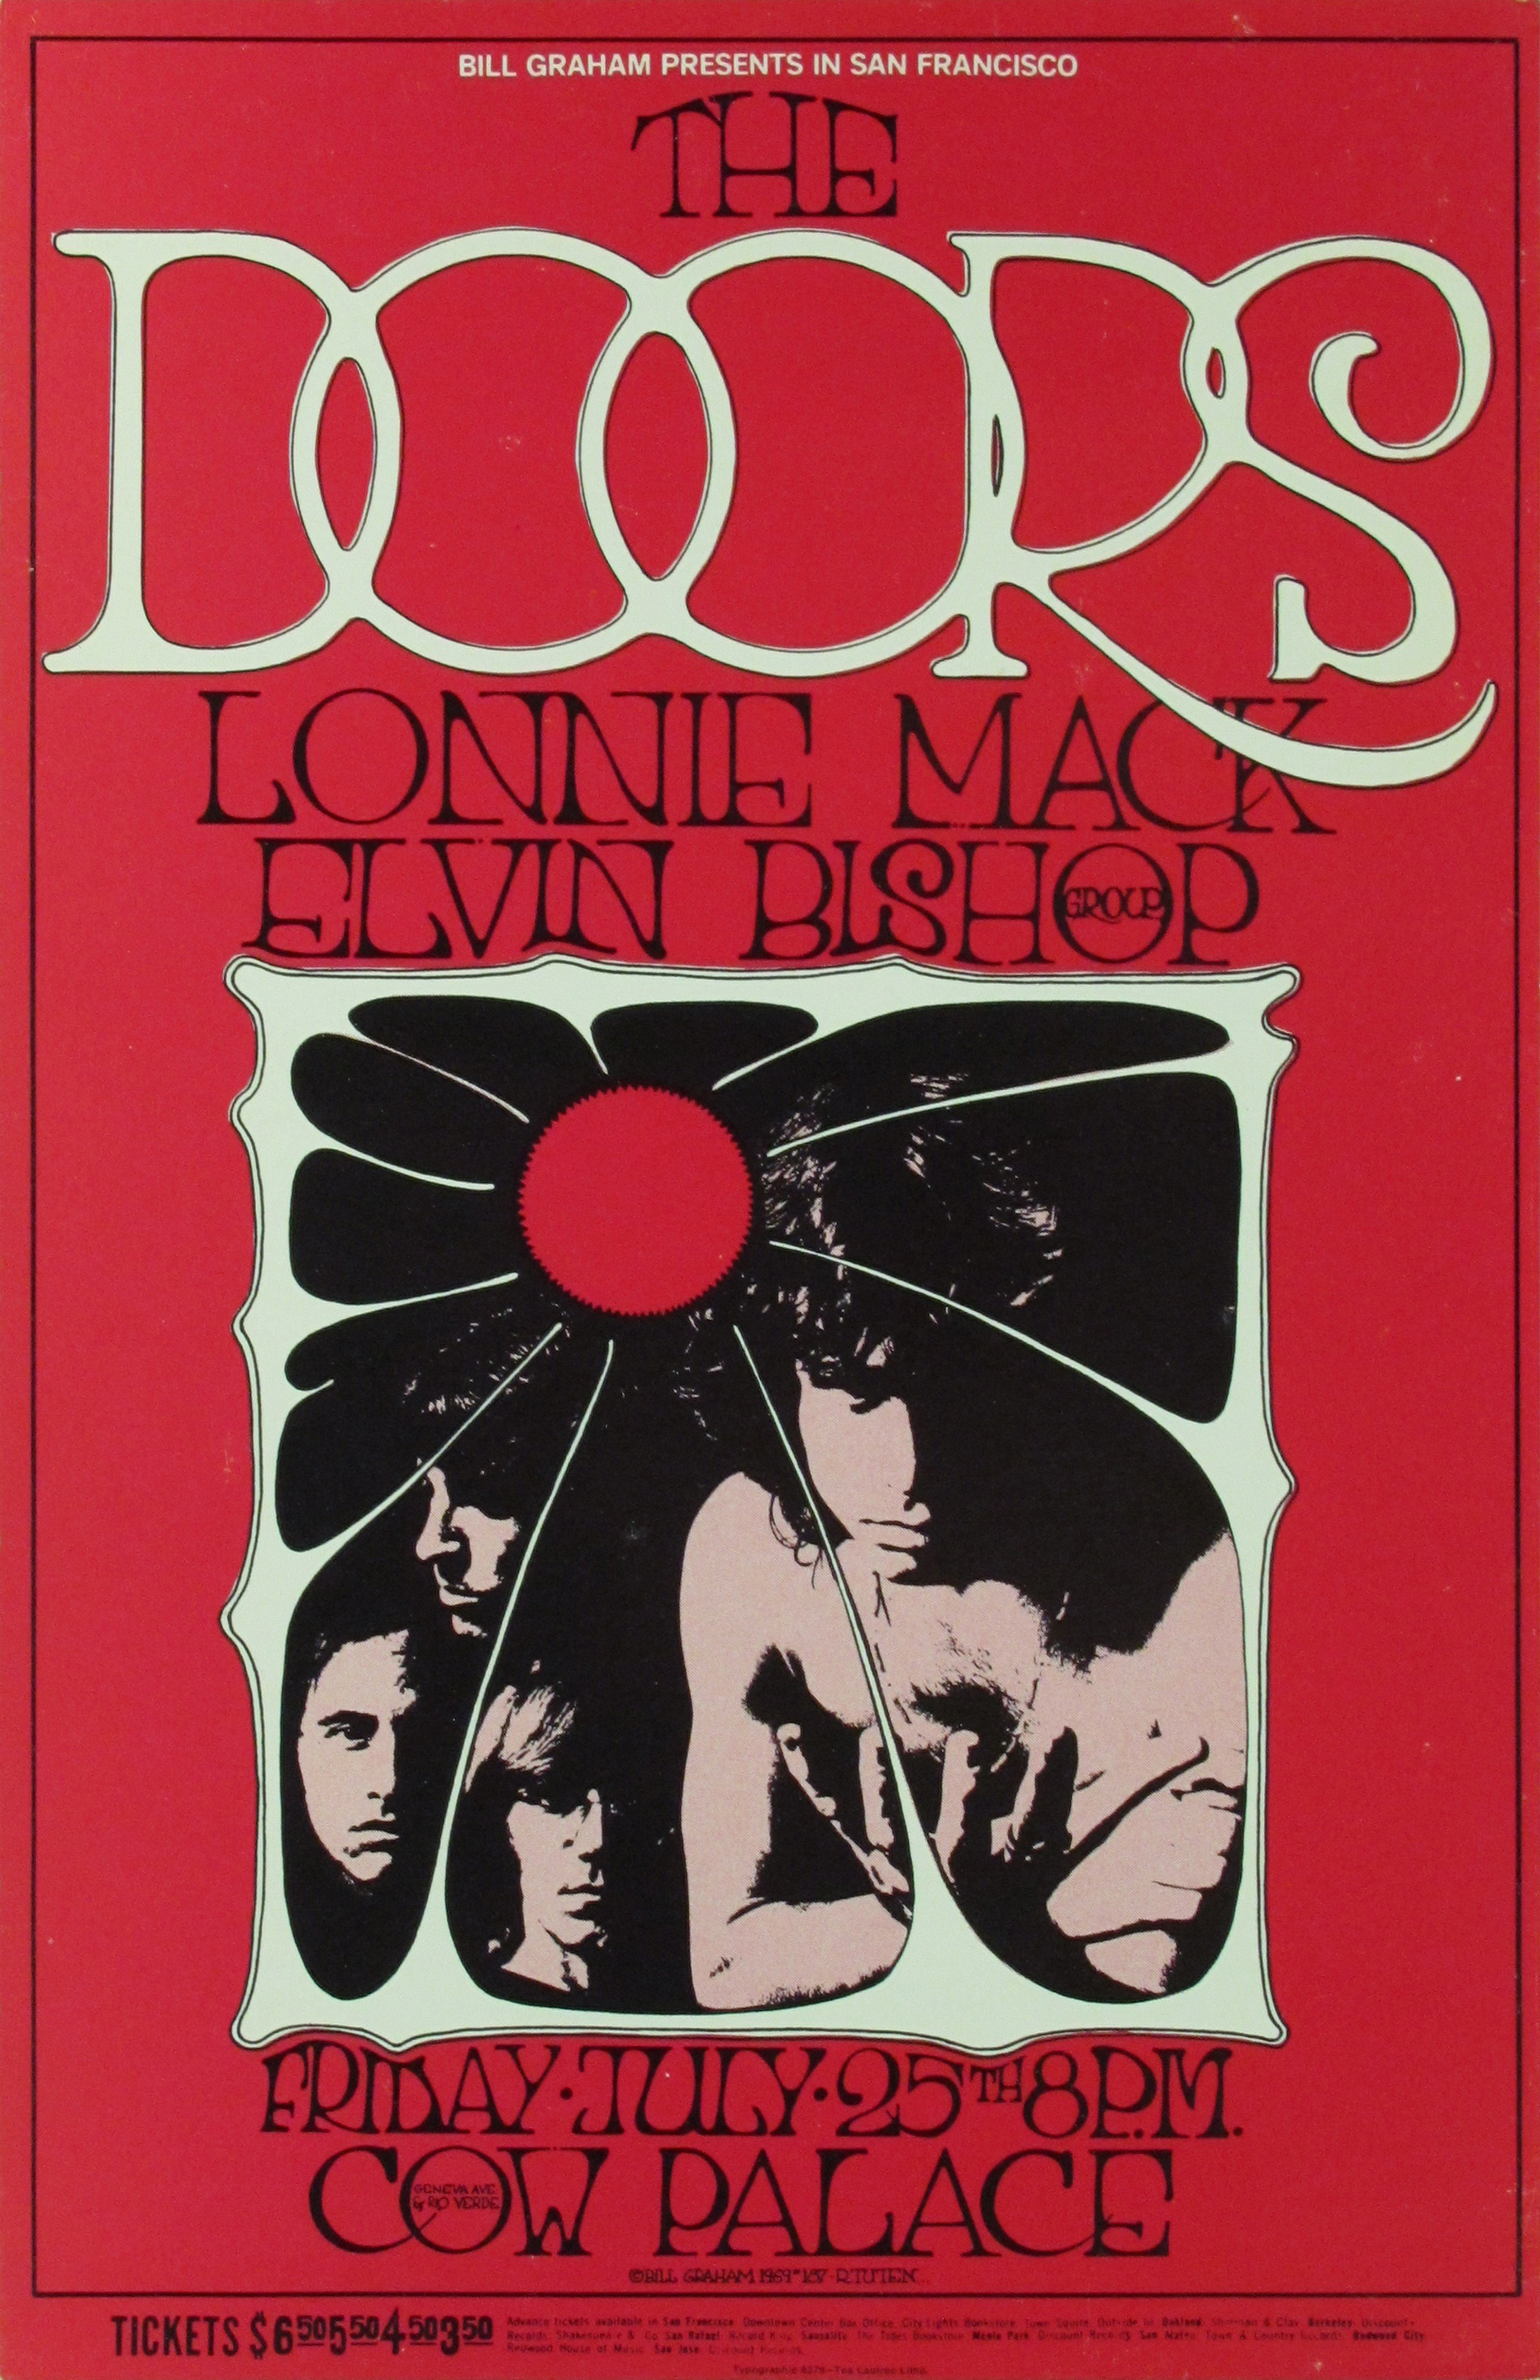 The Doors And Lonnie Mack Concert Postcard